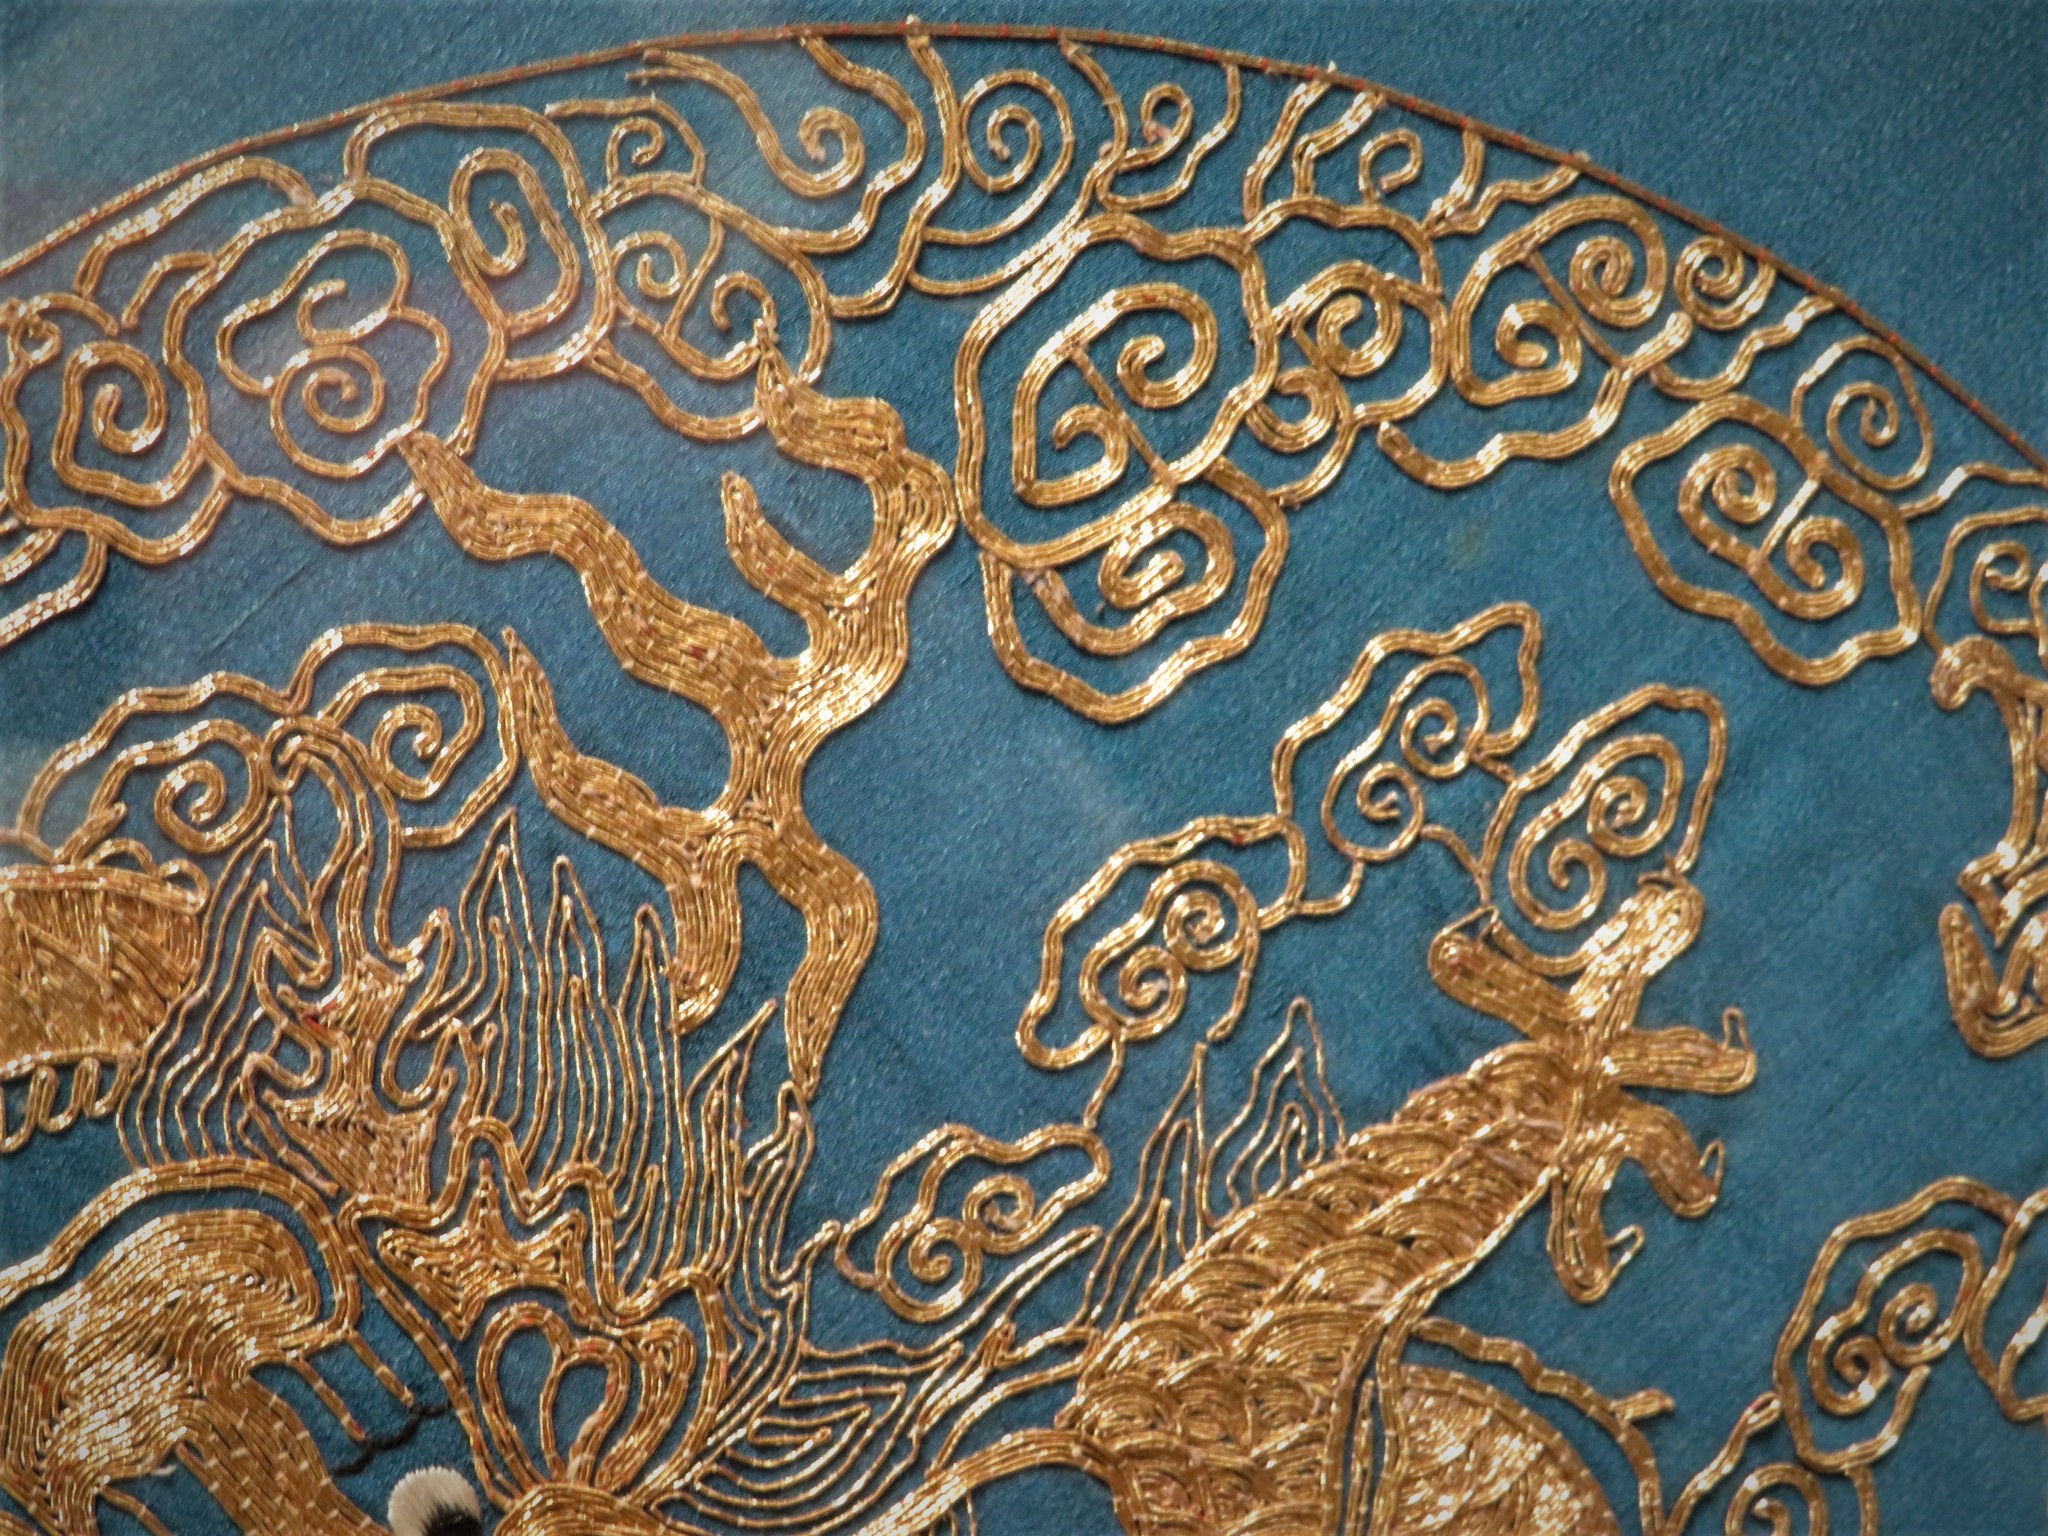 FRAMED AND GLAZED EMBROIDERY IN GOLD COLOURED THREAD DEPICTING CHINESE DRAGON WITH STYLIZED CLOUDS - Image 6 of 8